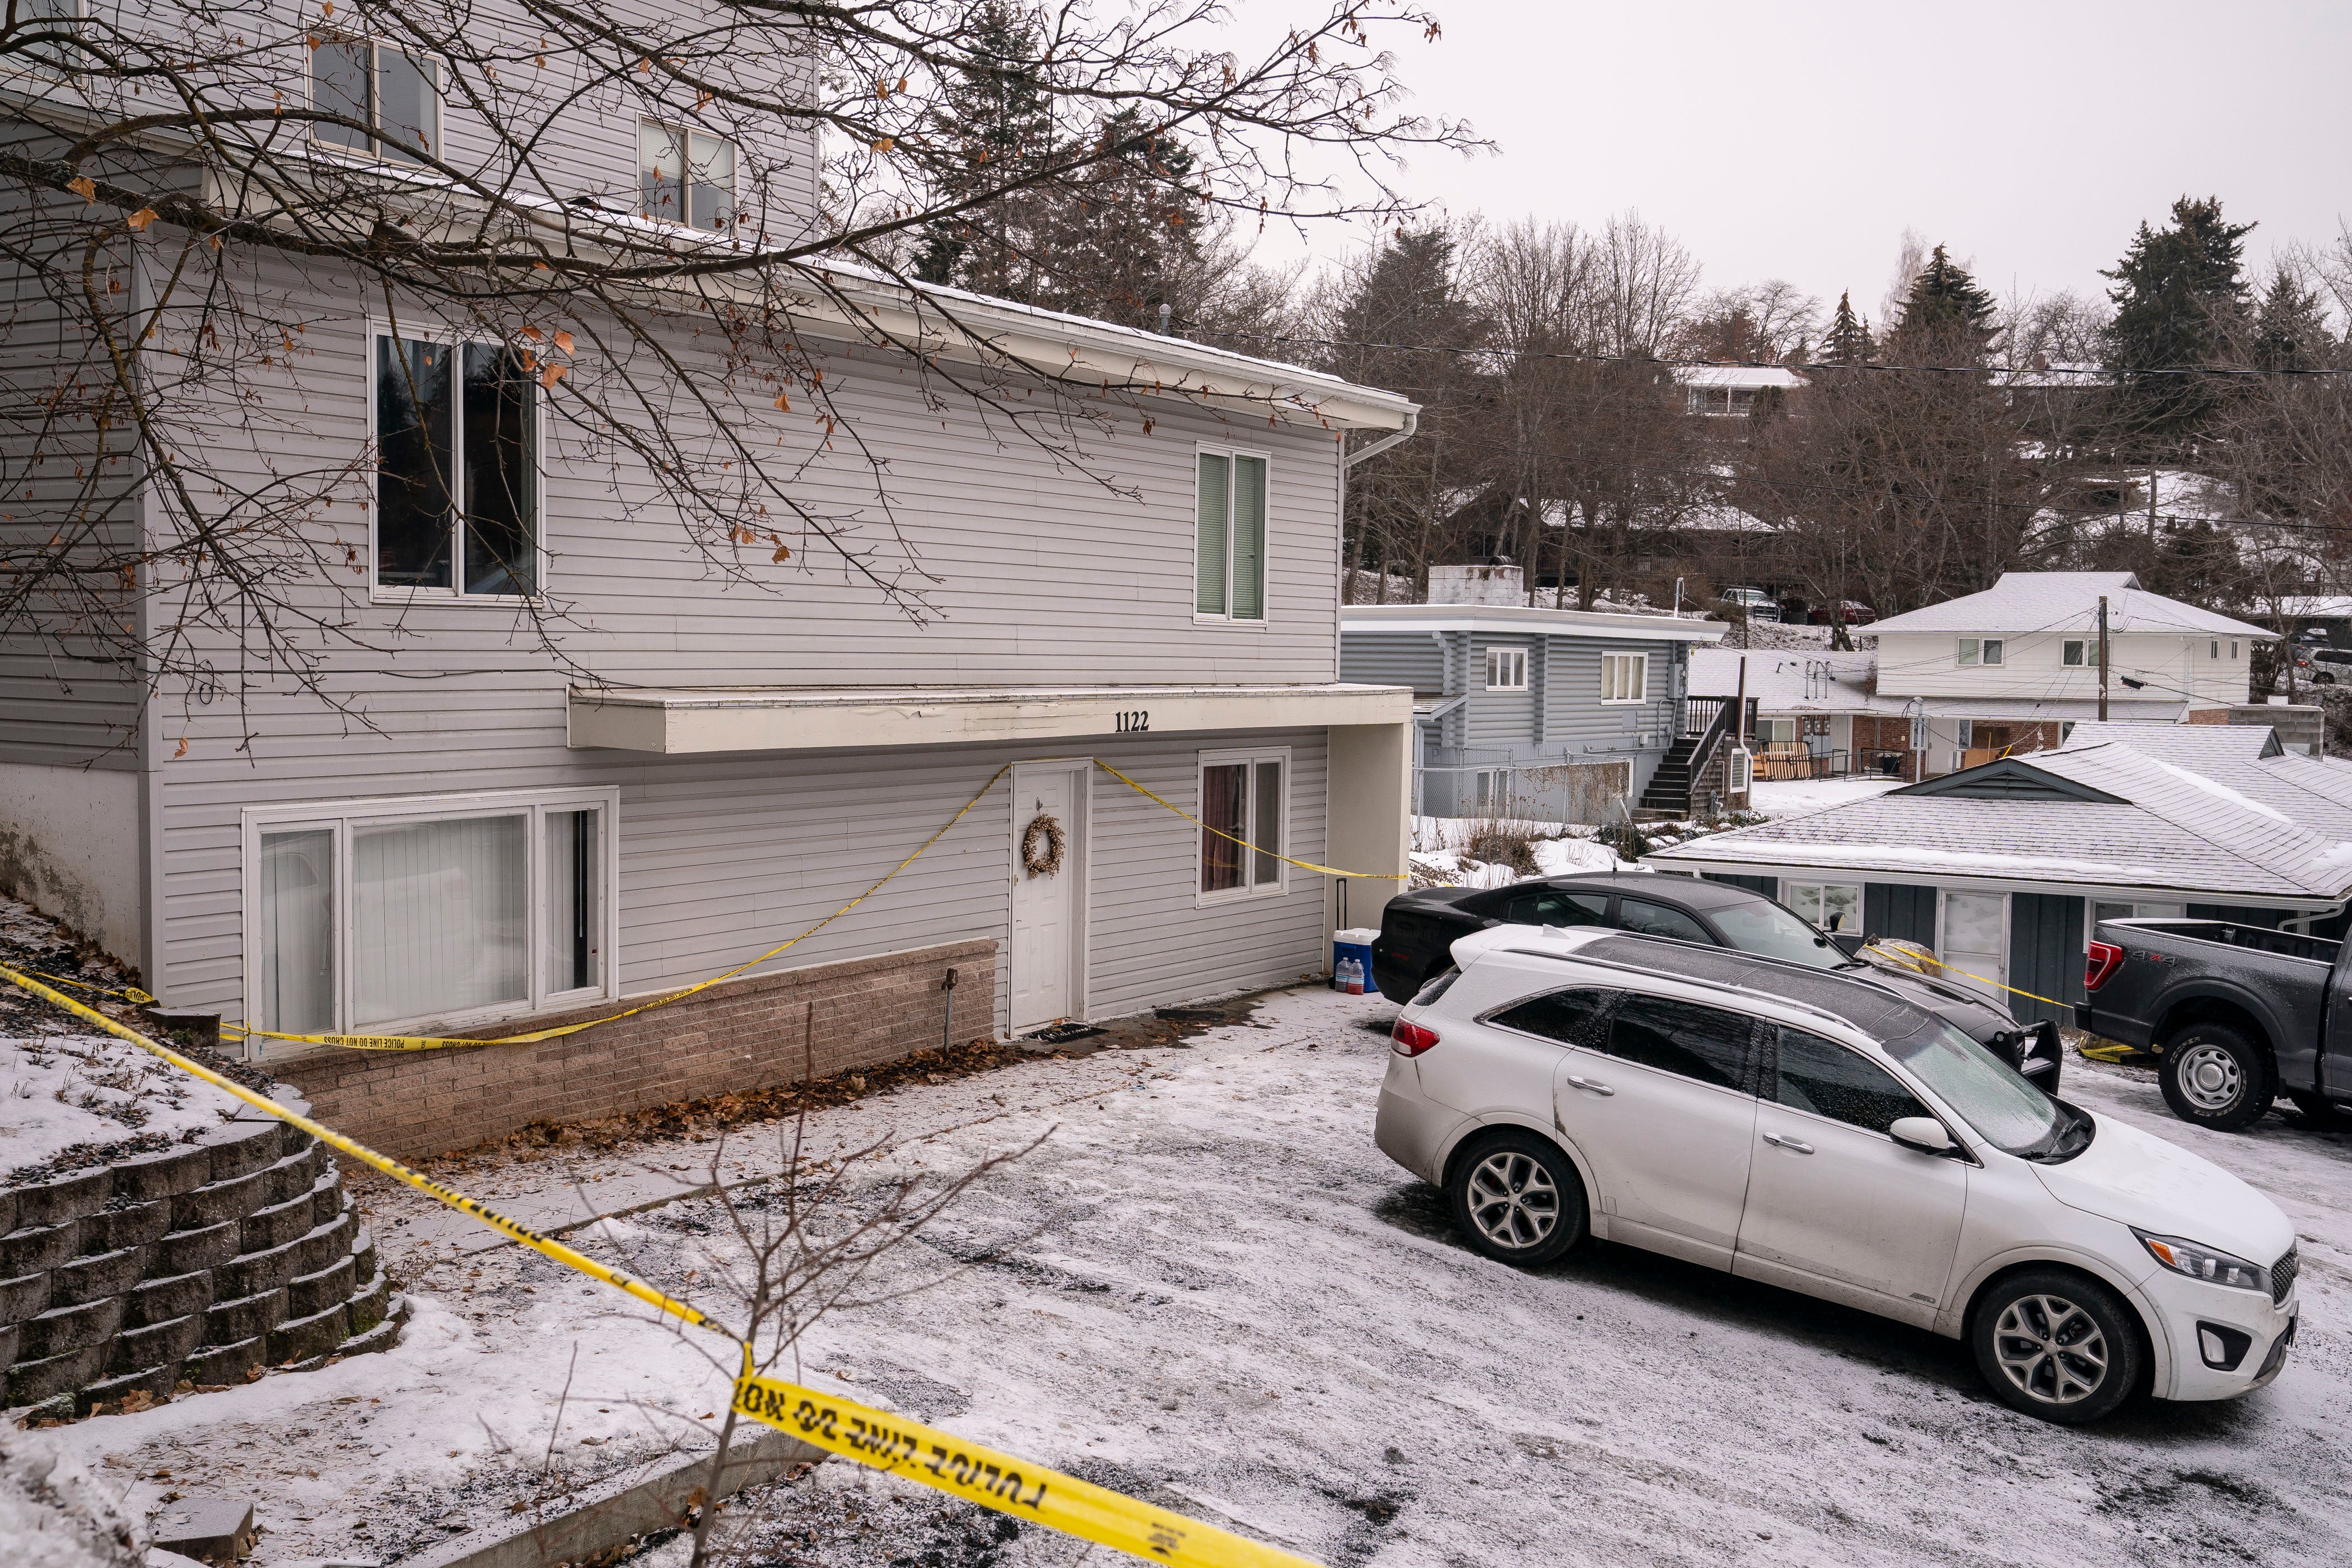 Police tape surrounds the home that was the site of the quadruple murder